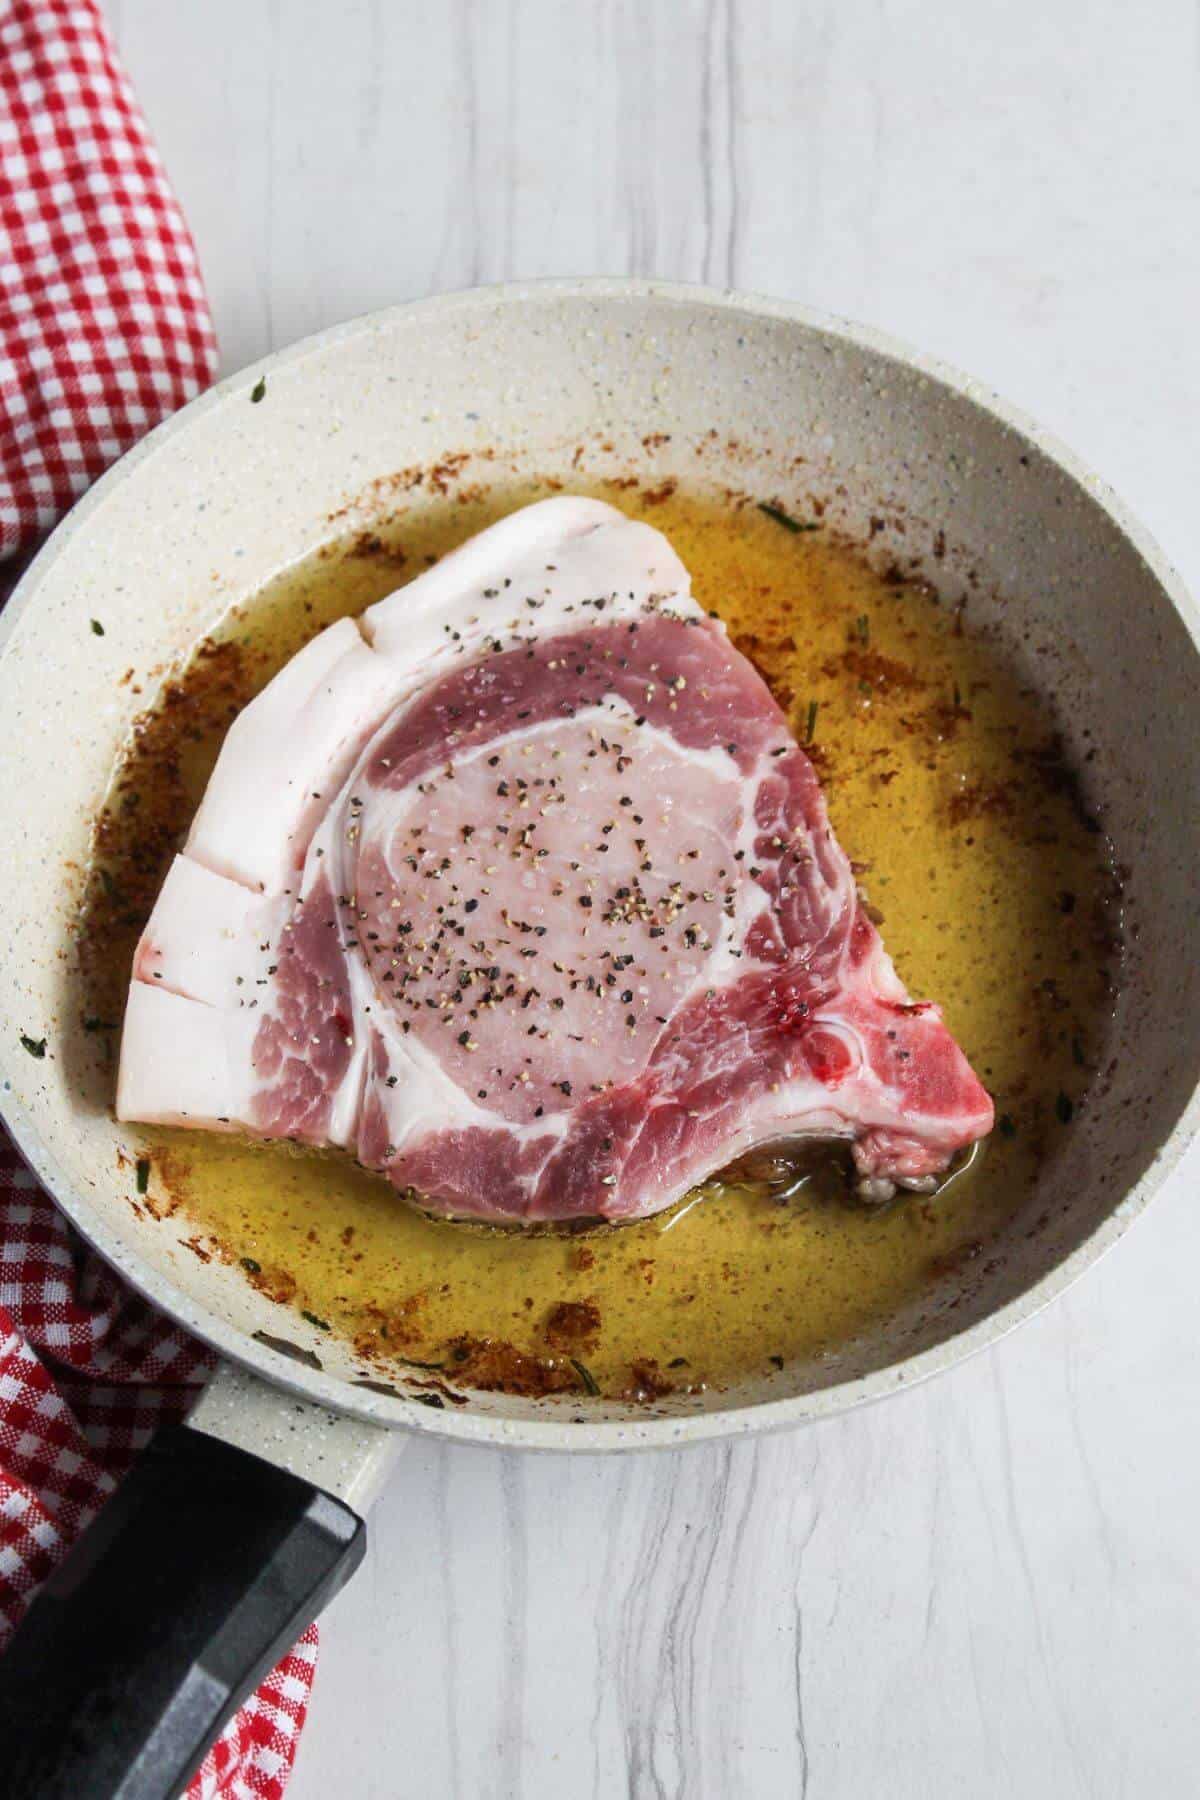 A bone-in pork chop is cooked in a frying pan.